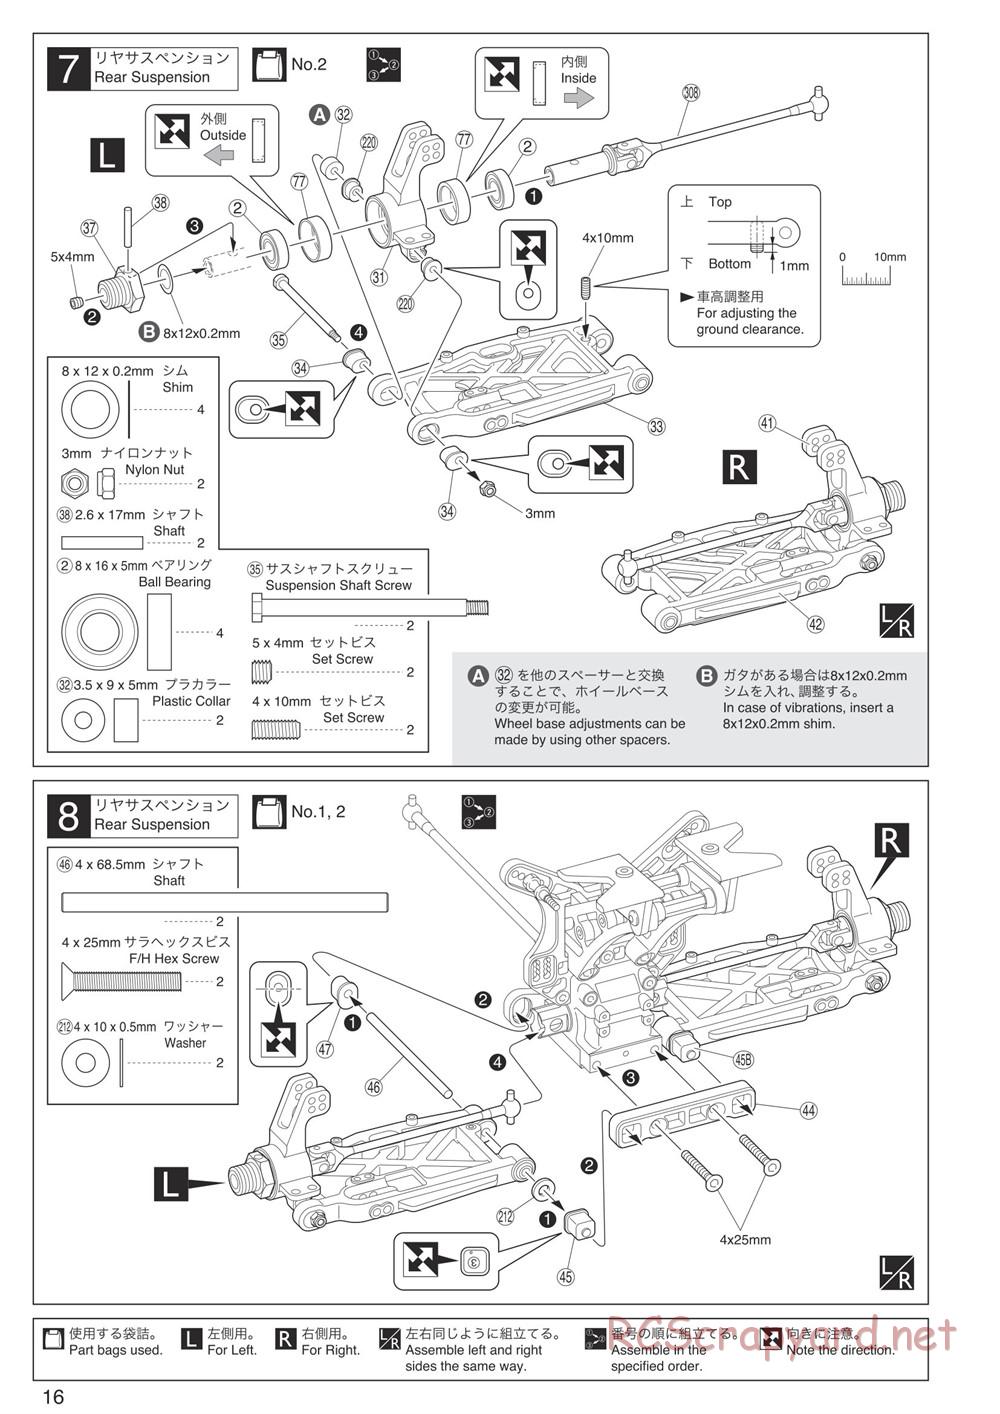 Kyosho - Inferno MP9 TKI4 10th Anniversary Special Edition - Manual - Page 16